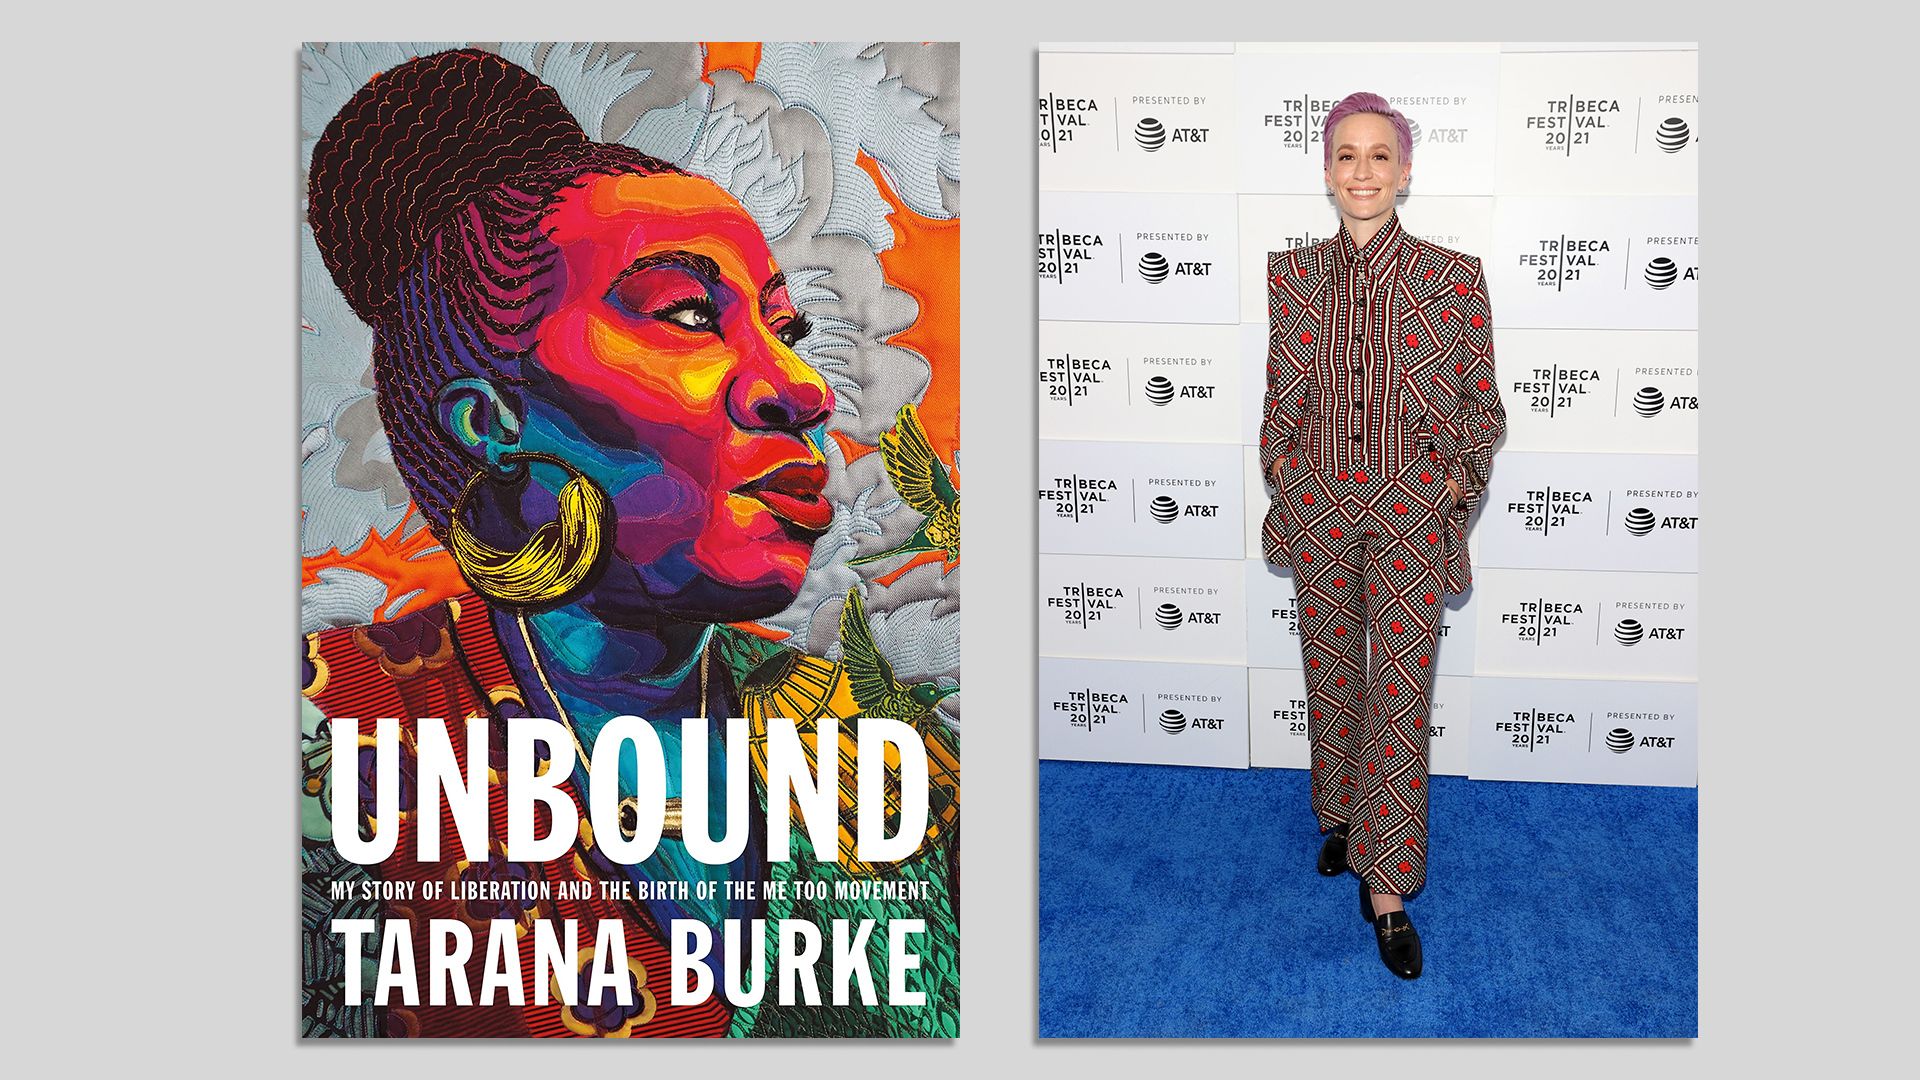 A combined image of the cover of 'Unbound' by Tarana Burke and Megan Rapinoe posing for a picture